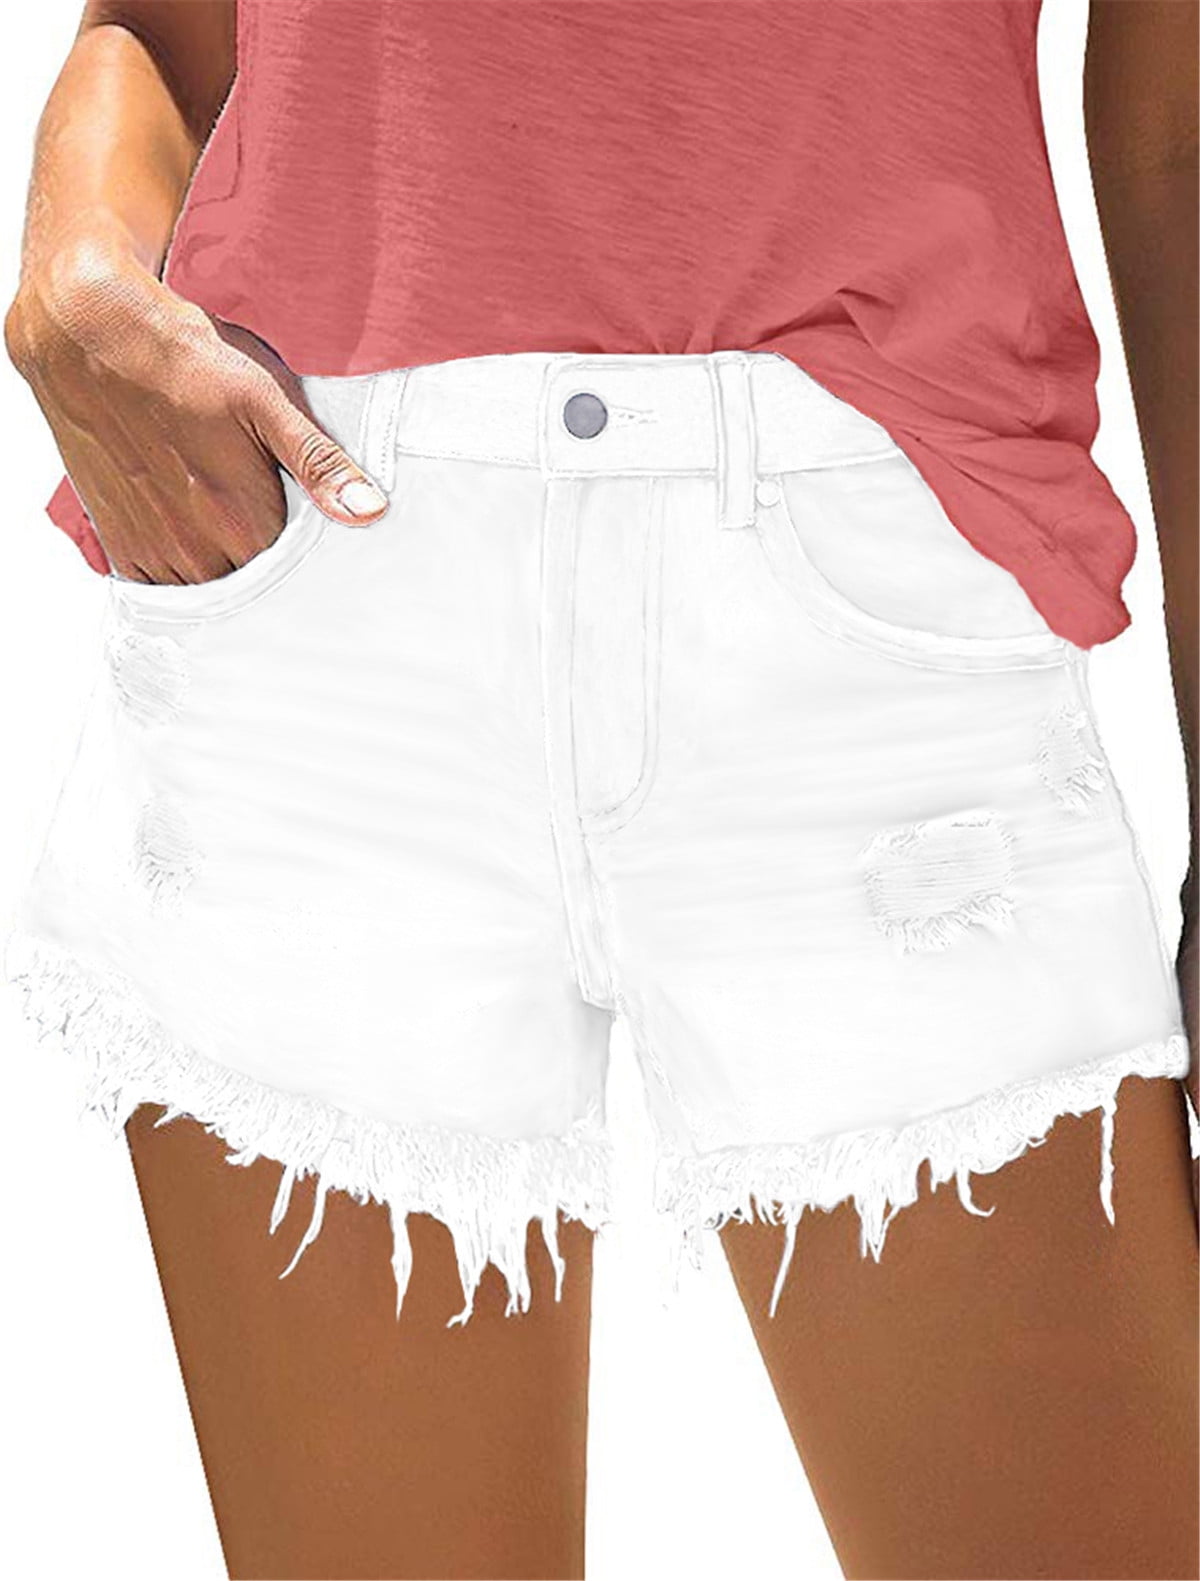 Miley Cyrus Wears White Denim Shorts & Jacket - THE JEANS BLOG